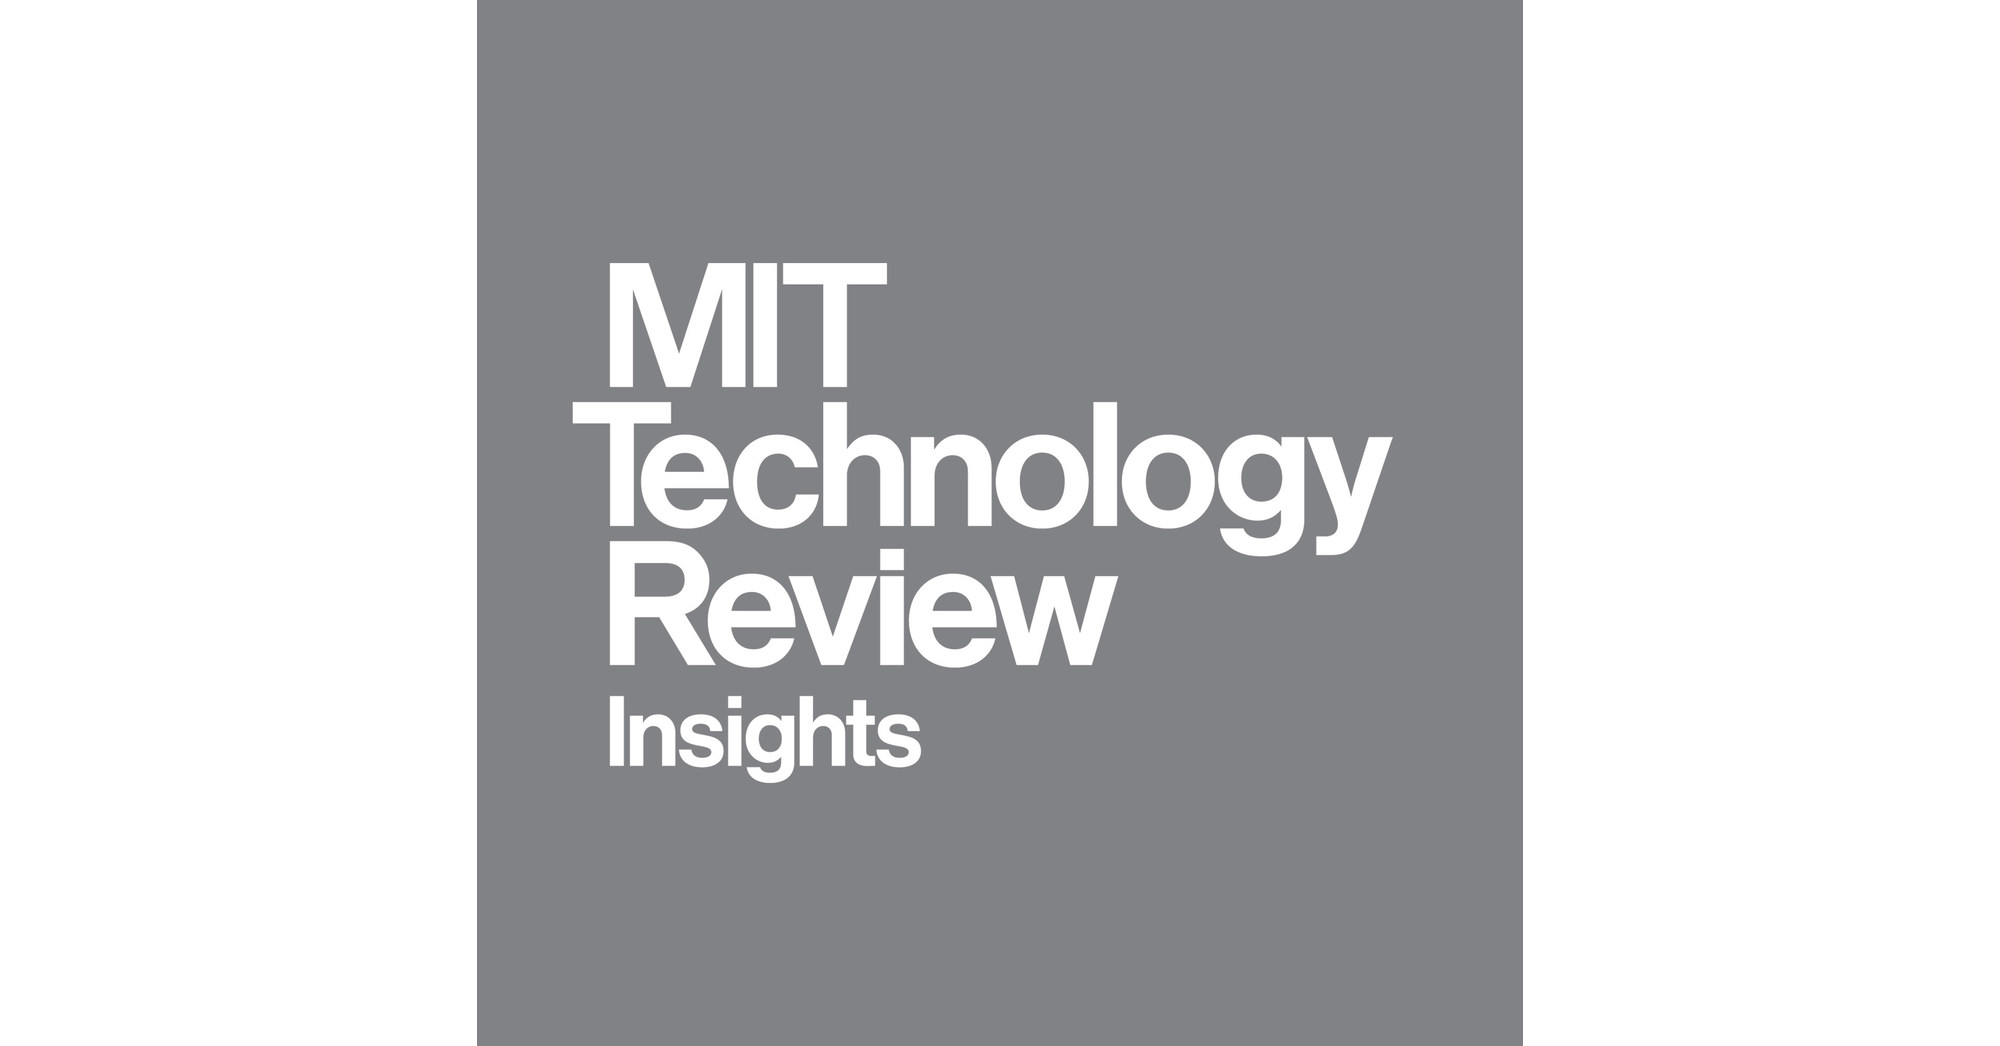 Accountable know-how use now a crucial enterprise consideration, suggests MIT Technological know-how Critique Insights report